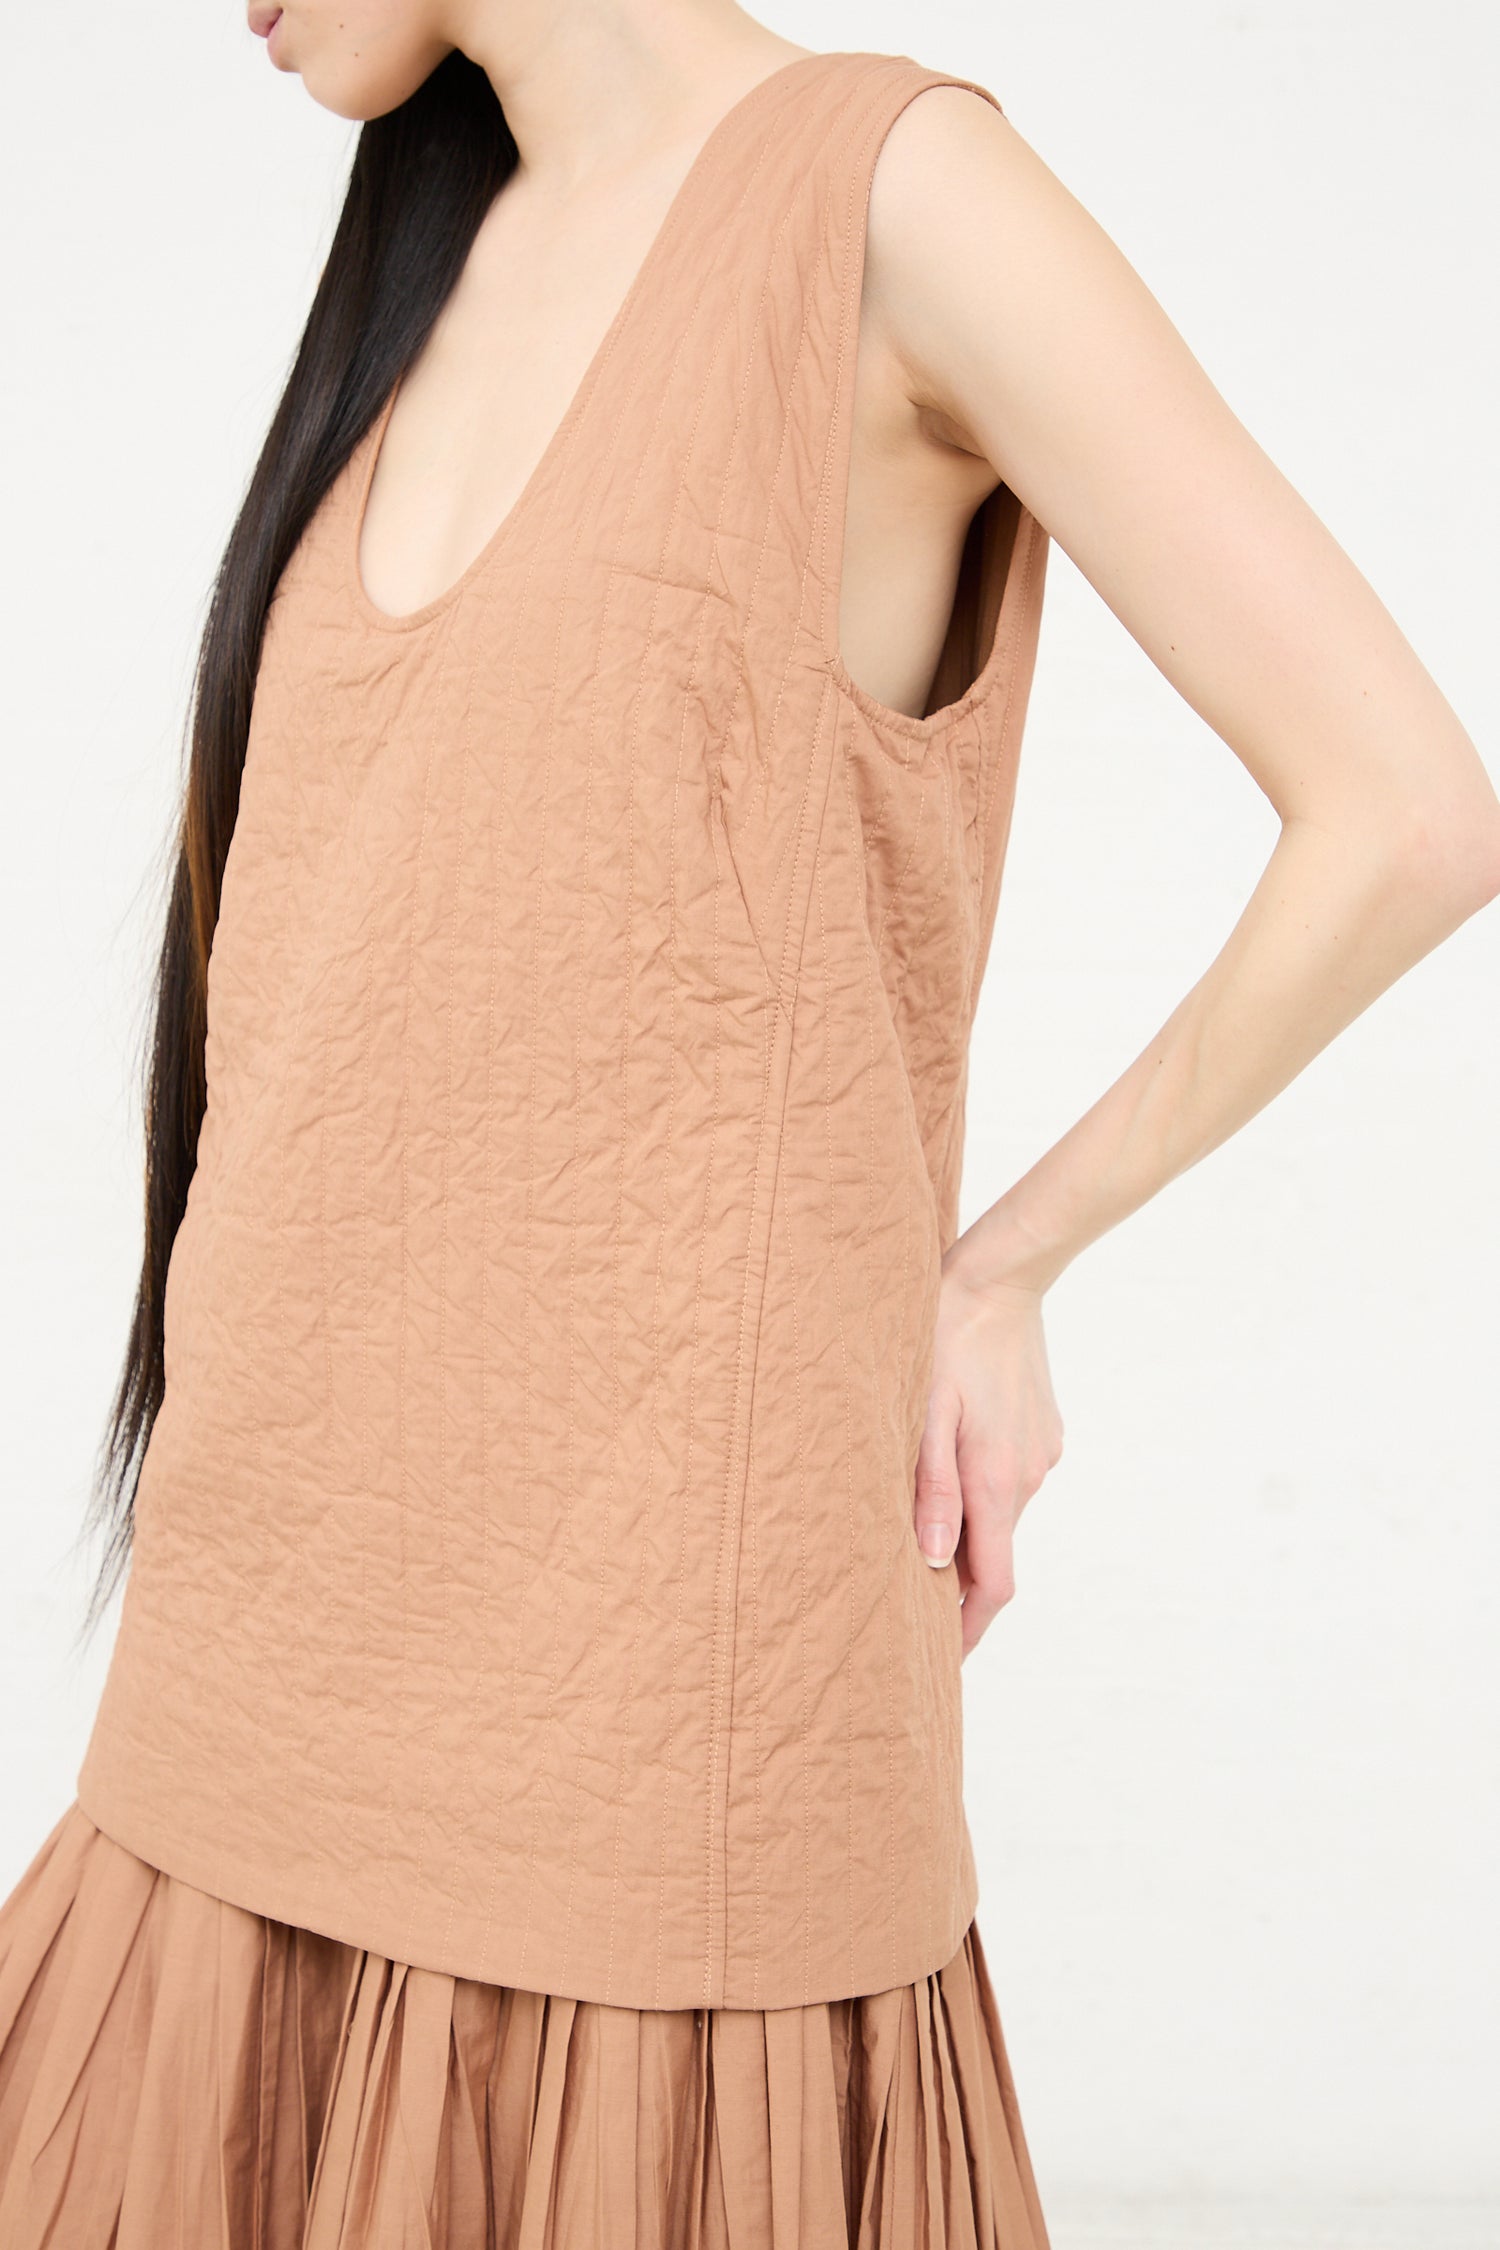 Woman wearing a sleeveless Rachel Comey Calin Dress in Camel with a textured fabric.